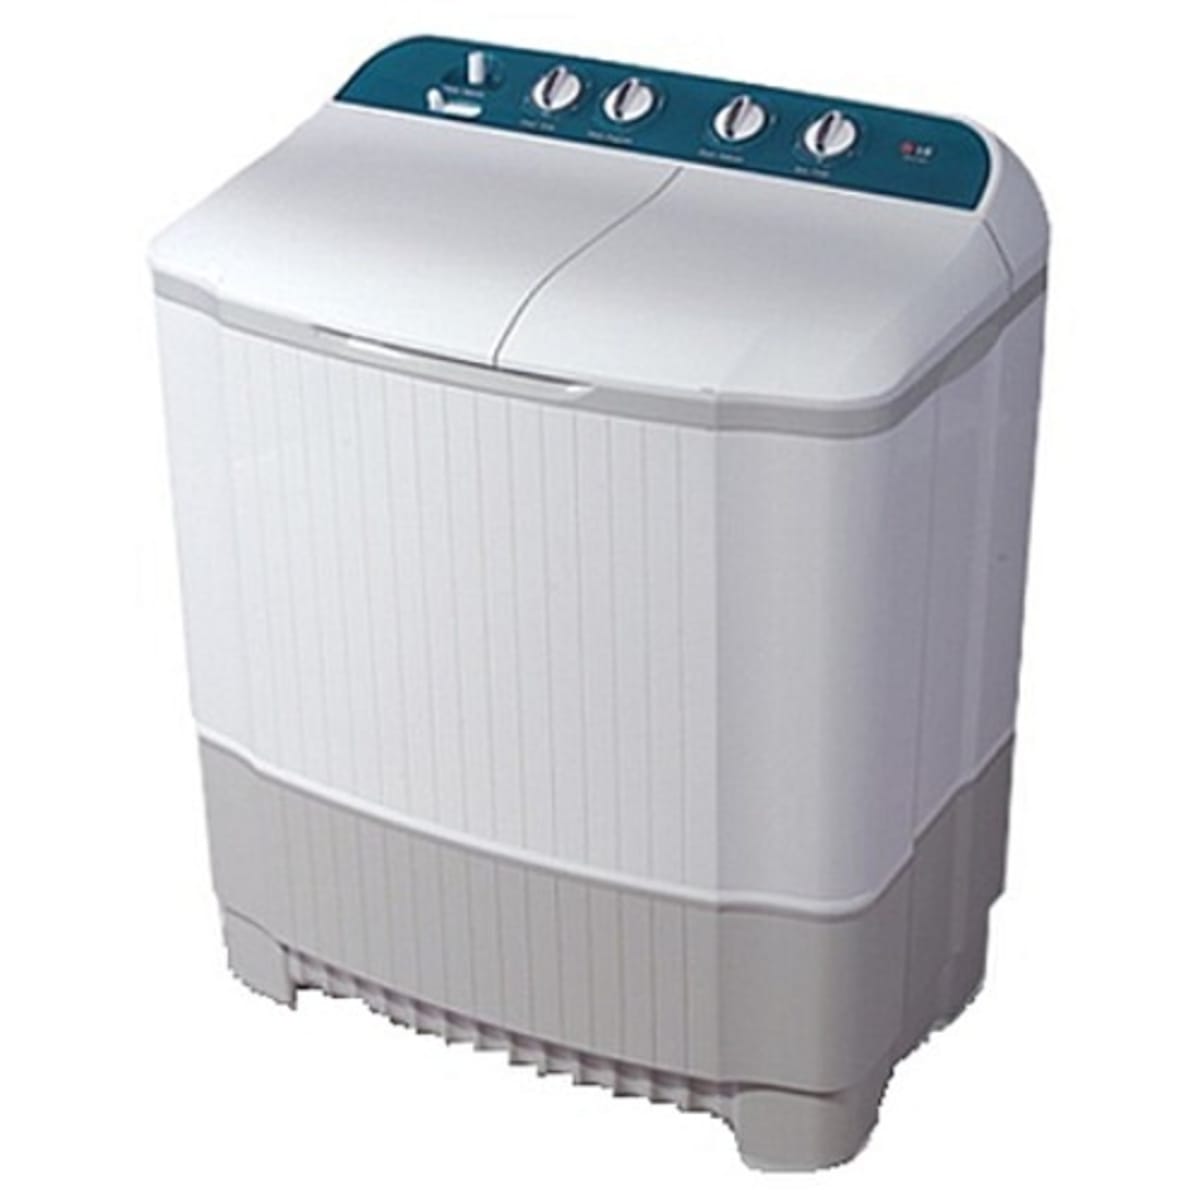 LG Semi Automatic Top Loader Twin-tub Washing Machine With Roller